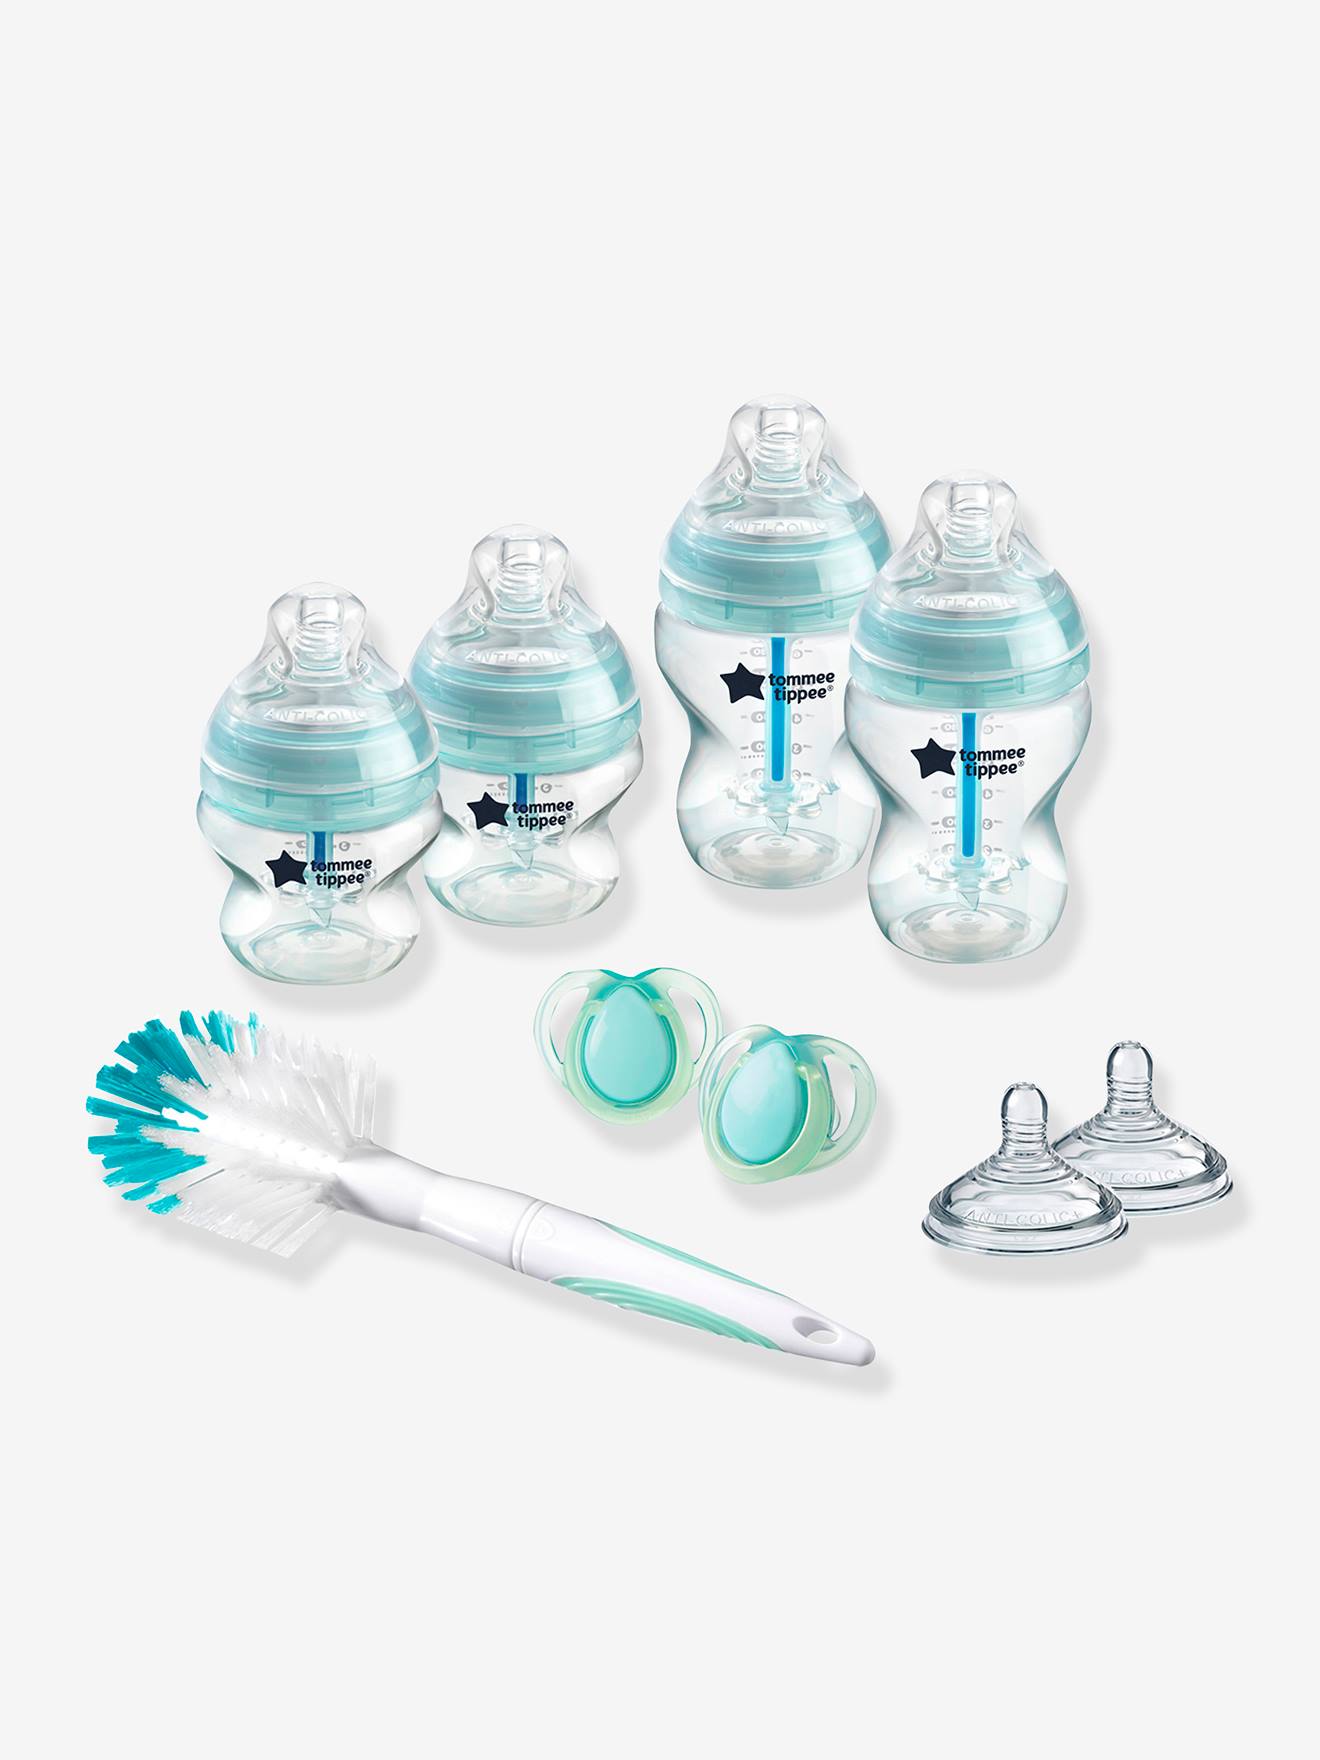 Kit de naissance Anti-Colique TOMMEE TIPPEE bleu - Tommee Tippee